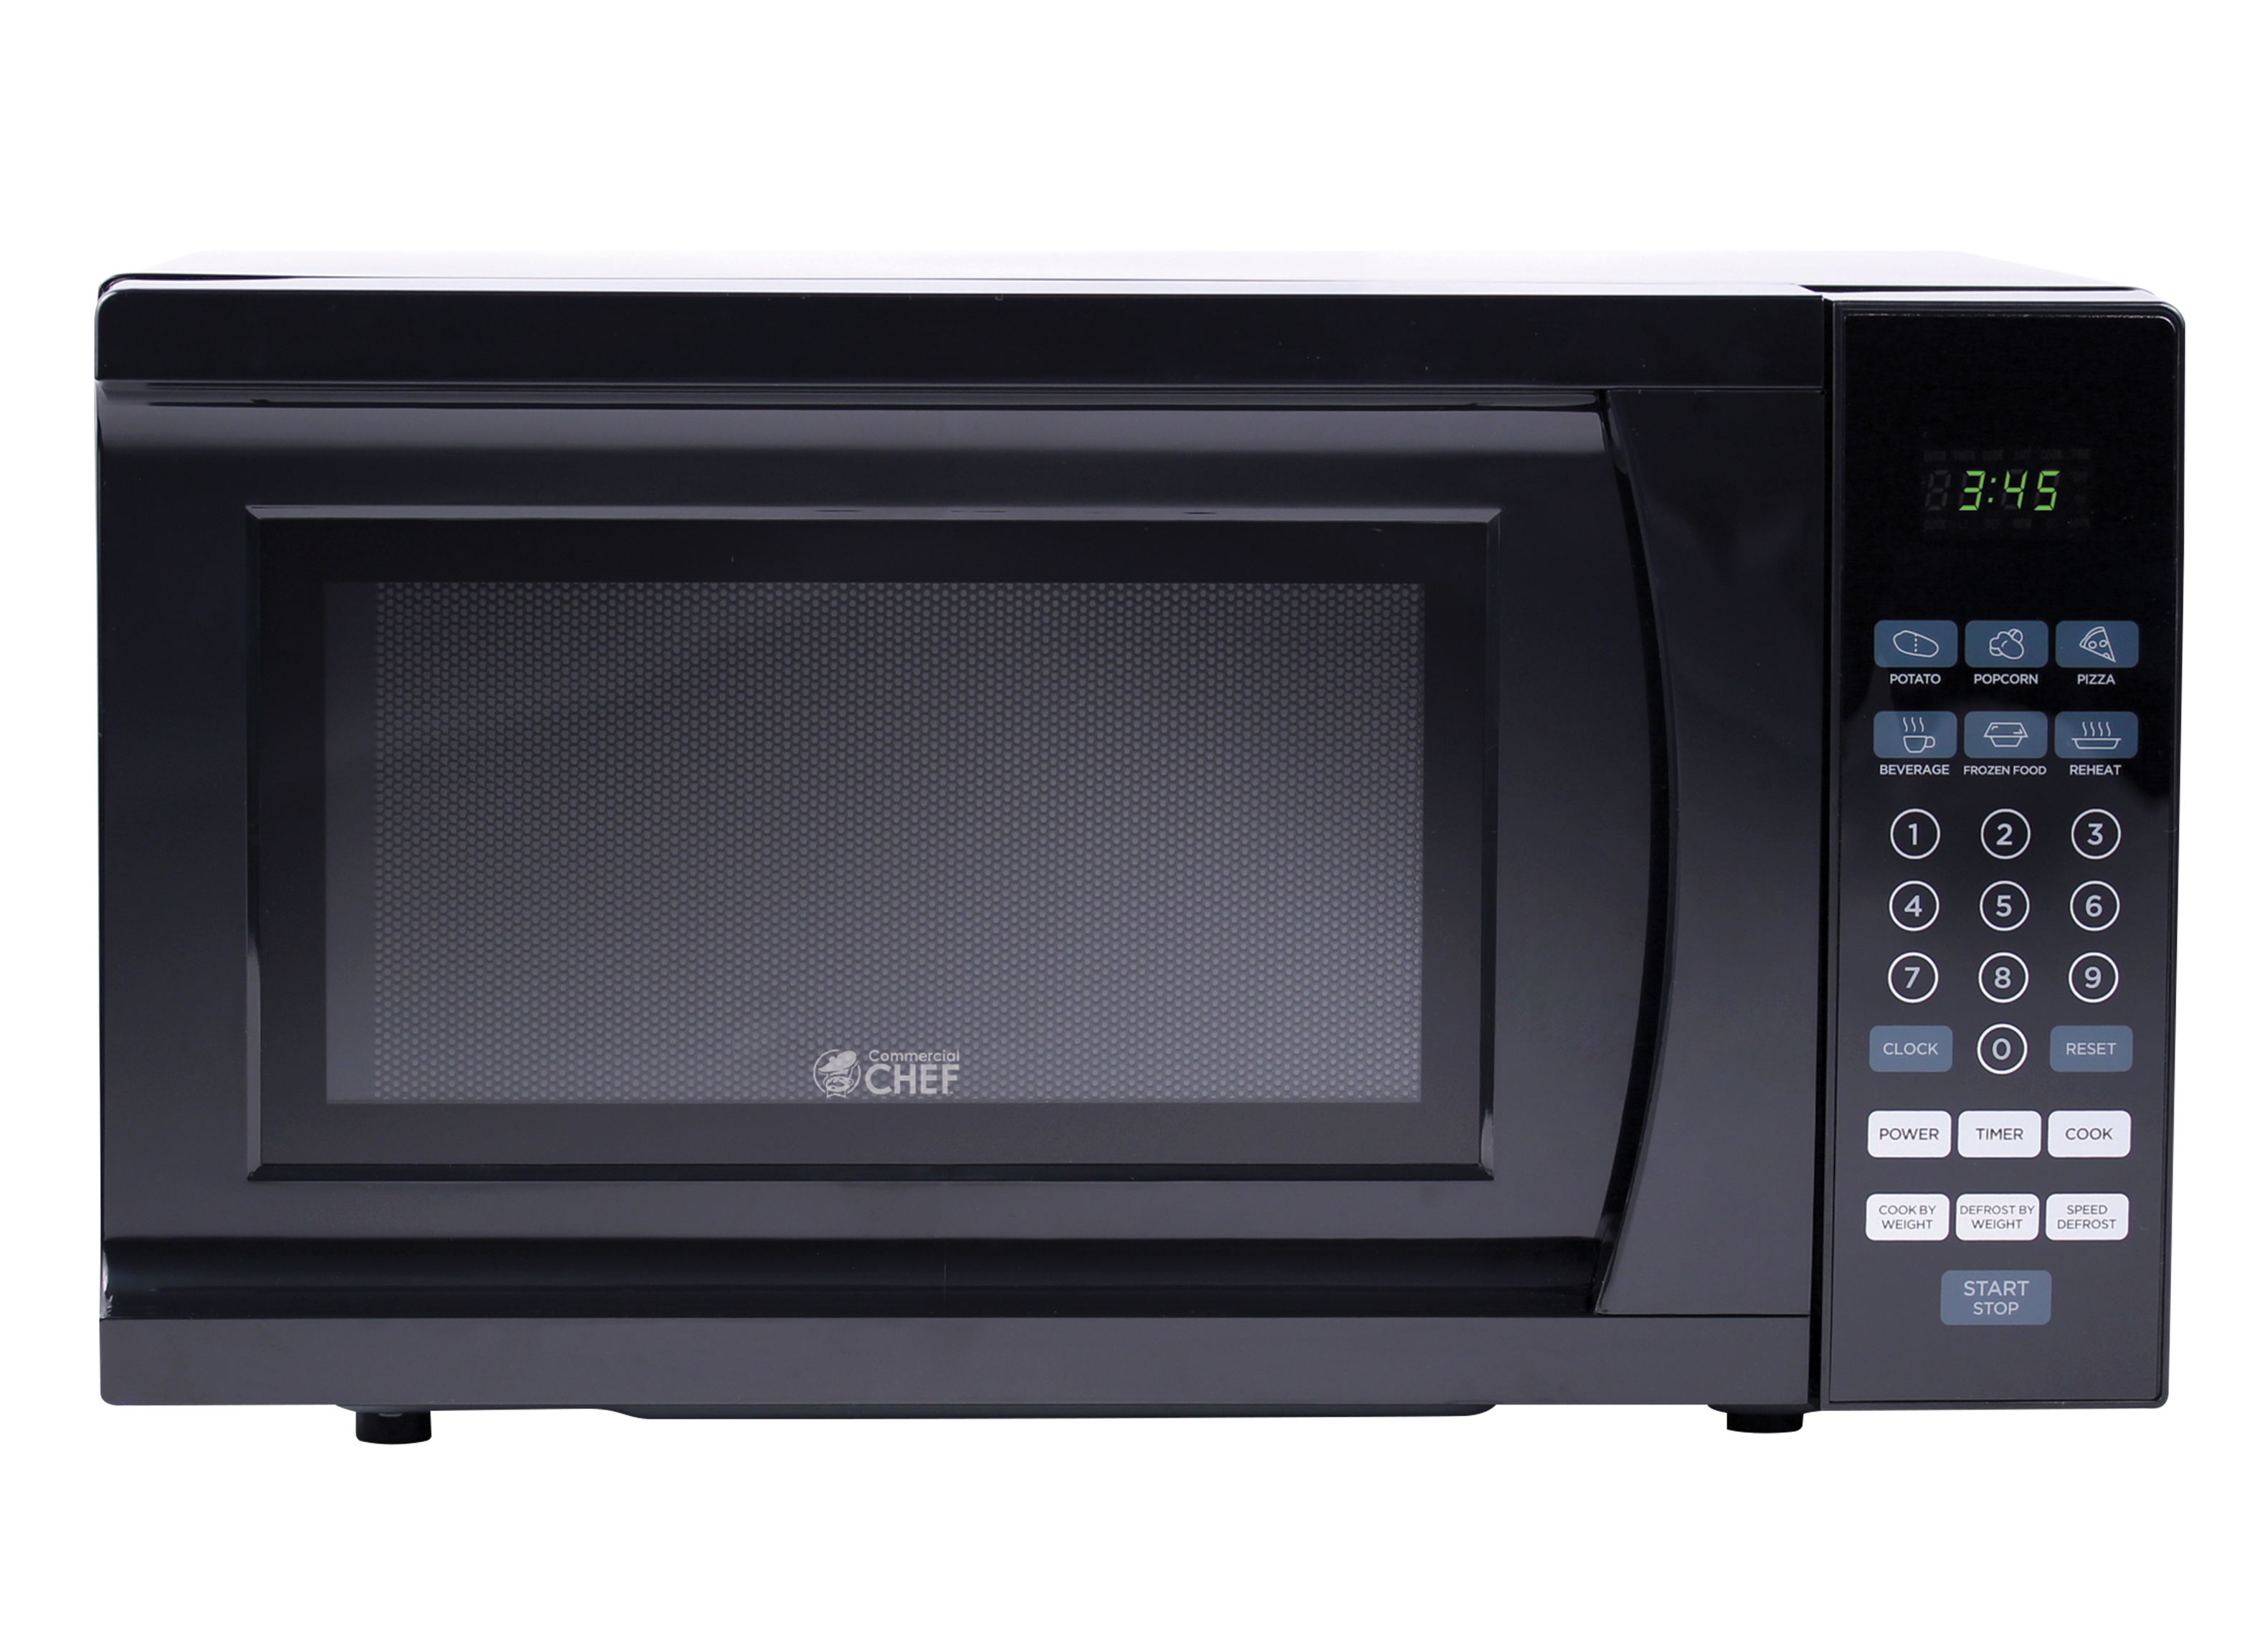 https://crdms.images.consumerreports.org/prod/products/cr/models/406734-small-countertop-microwaves-commercial-chef-chm770b-10029859.png